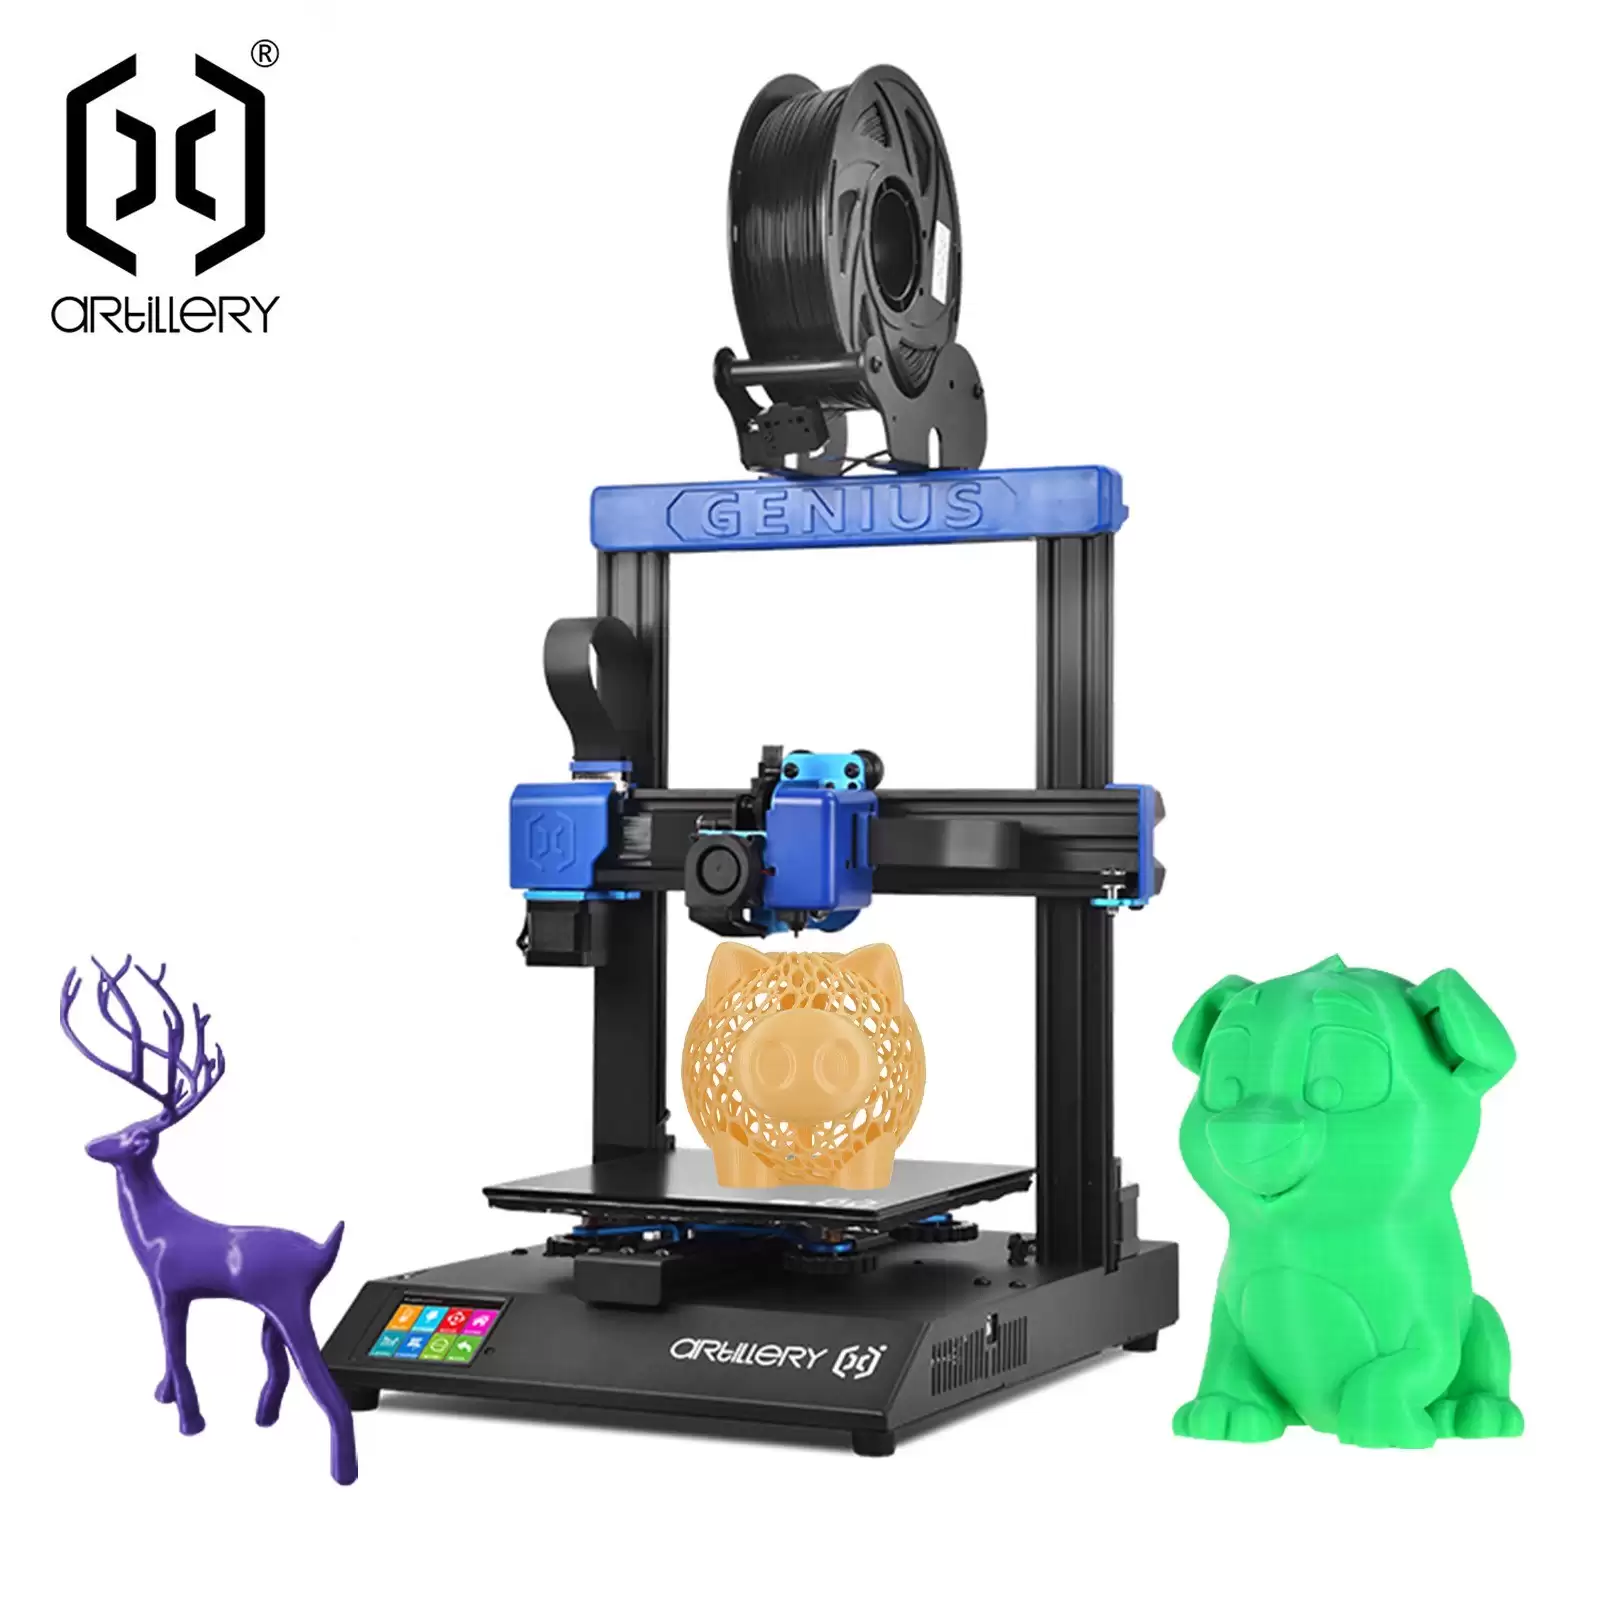 Order In Just $289 Artillery Genius Pro 3d Printer 220x220x250mm Printing Size With This Tomtop Discount Voucher